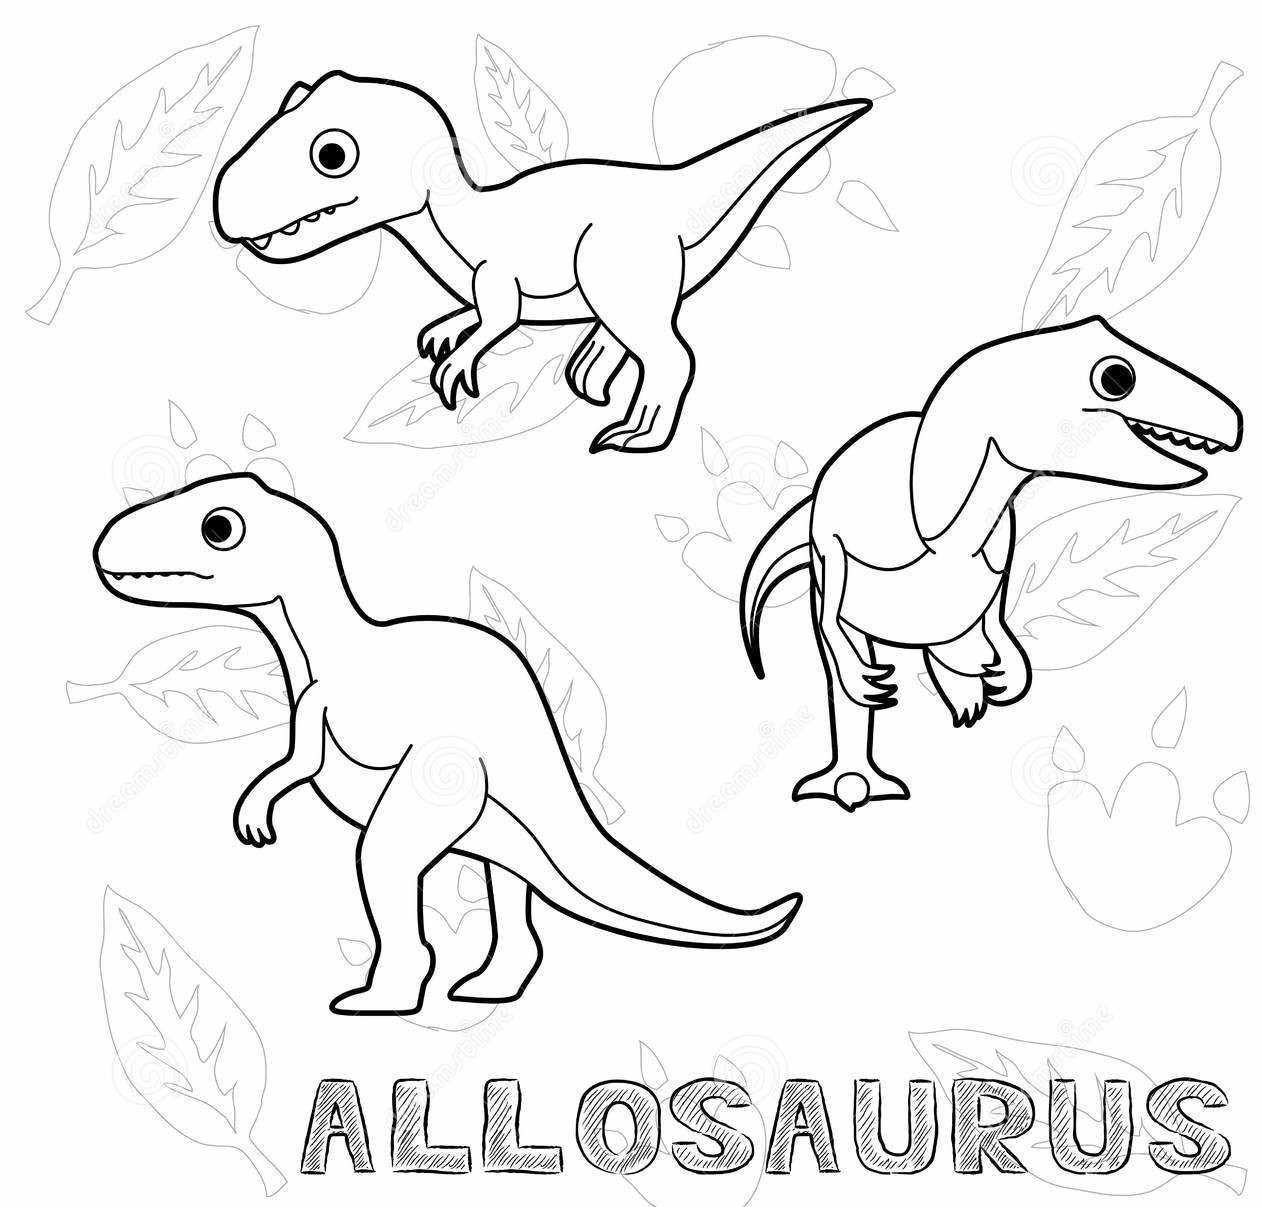 How to draw Allosuarus Coloring Page